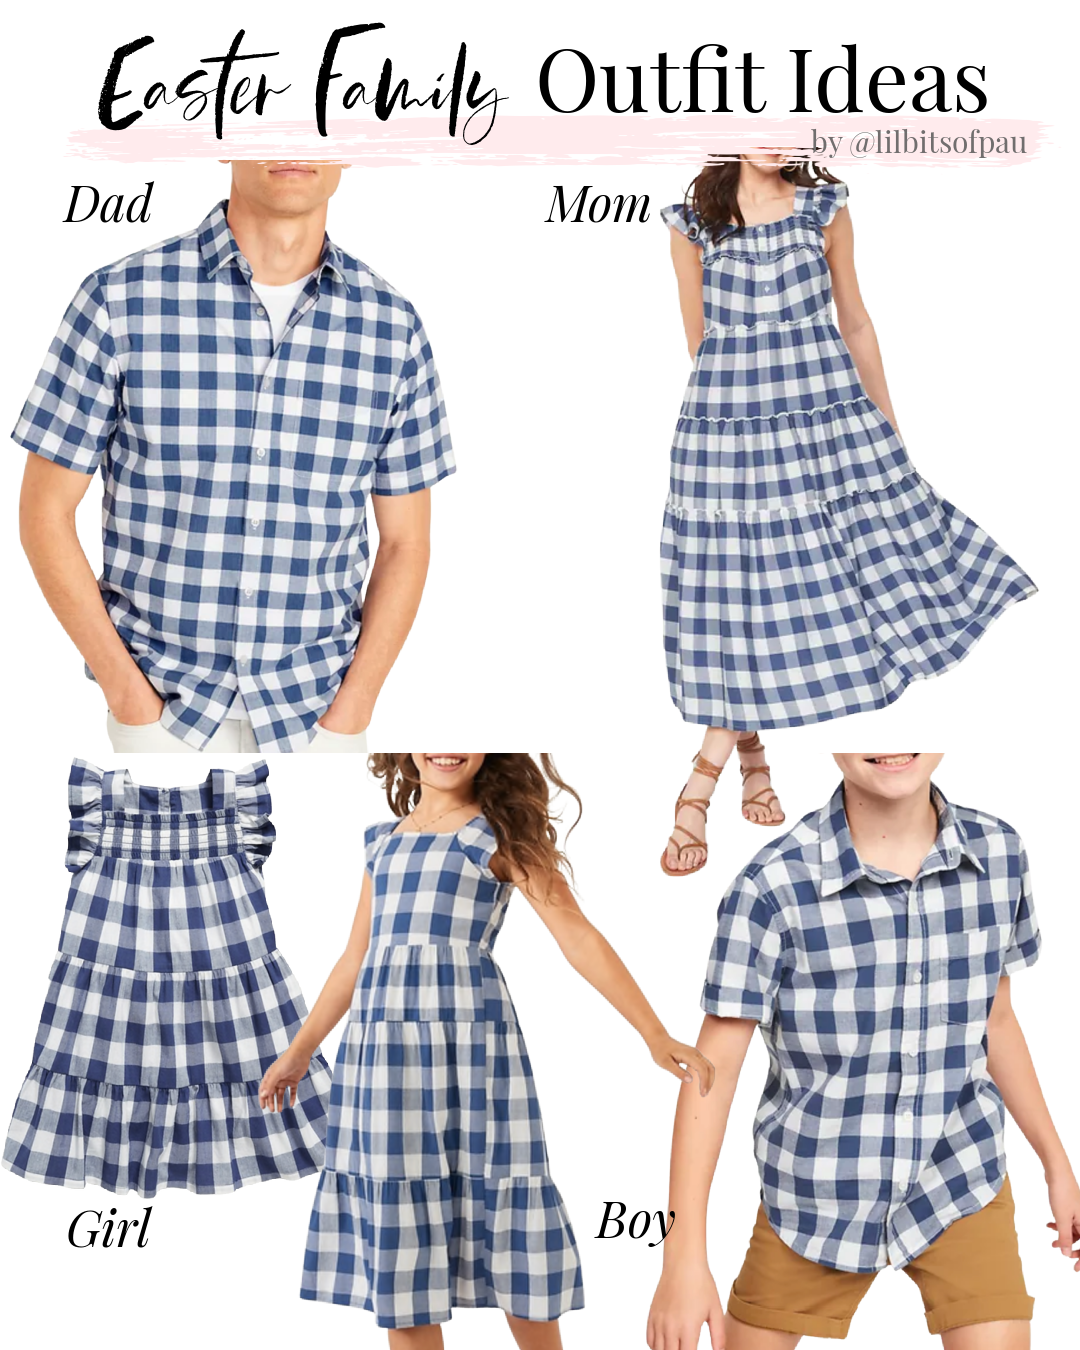 Matching Easter outfits for everyone in the family, family outfits, blue gingham looks for the family